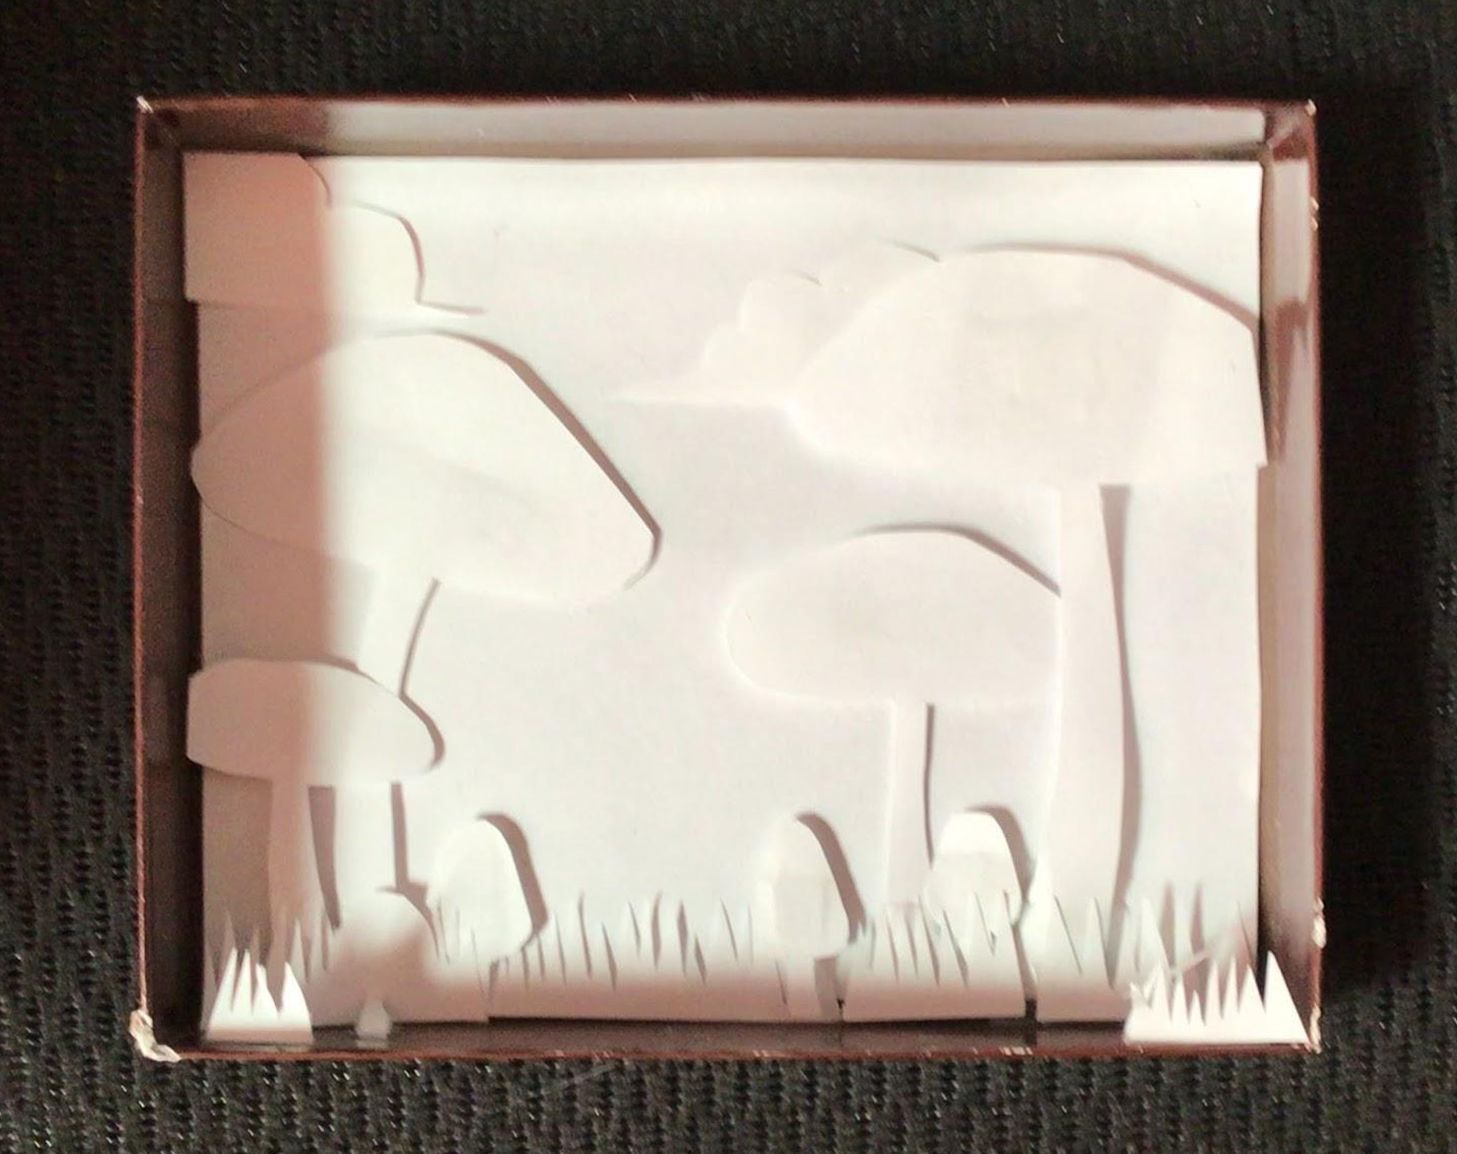 shadow box with mushrooms cut out of white paper and layered to create shadows and depth